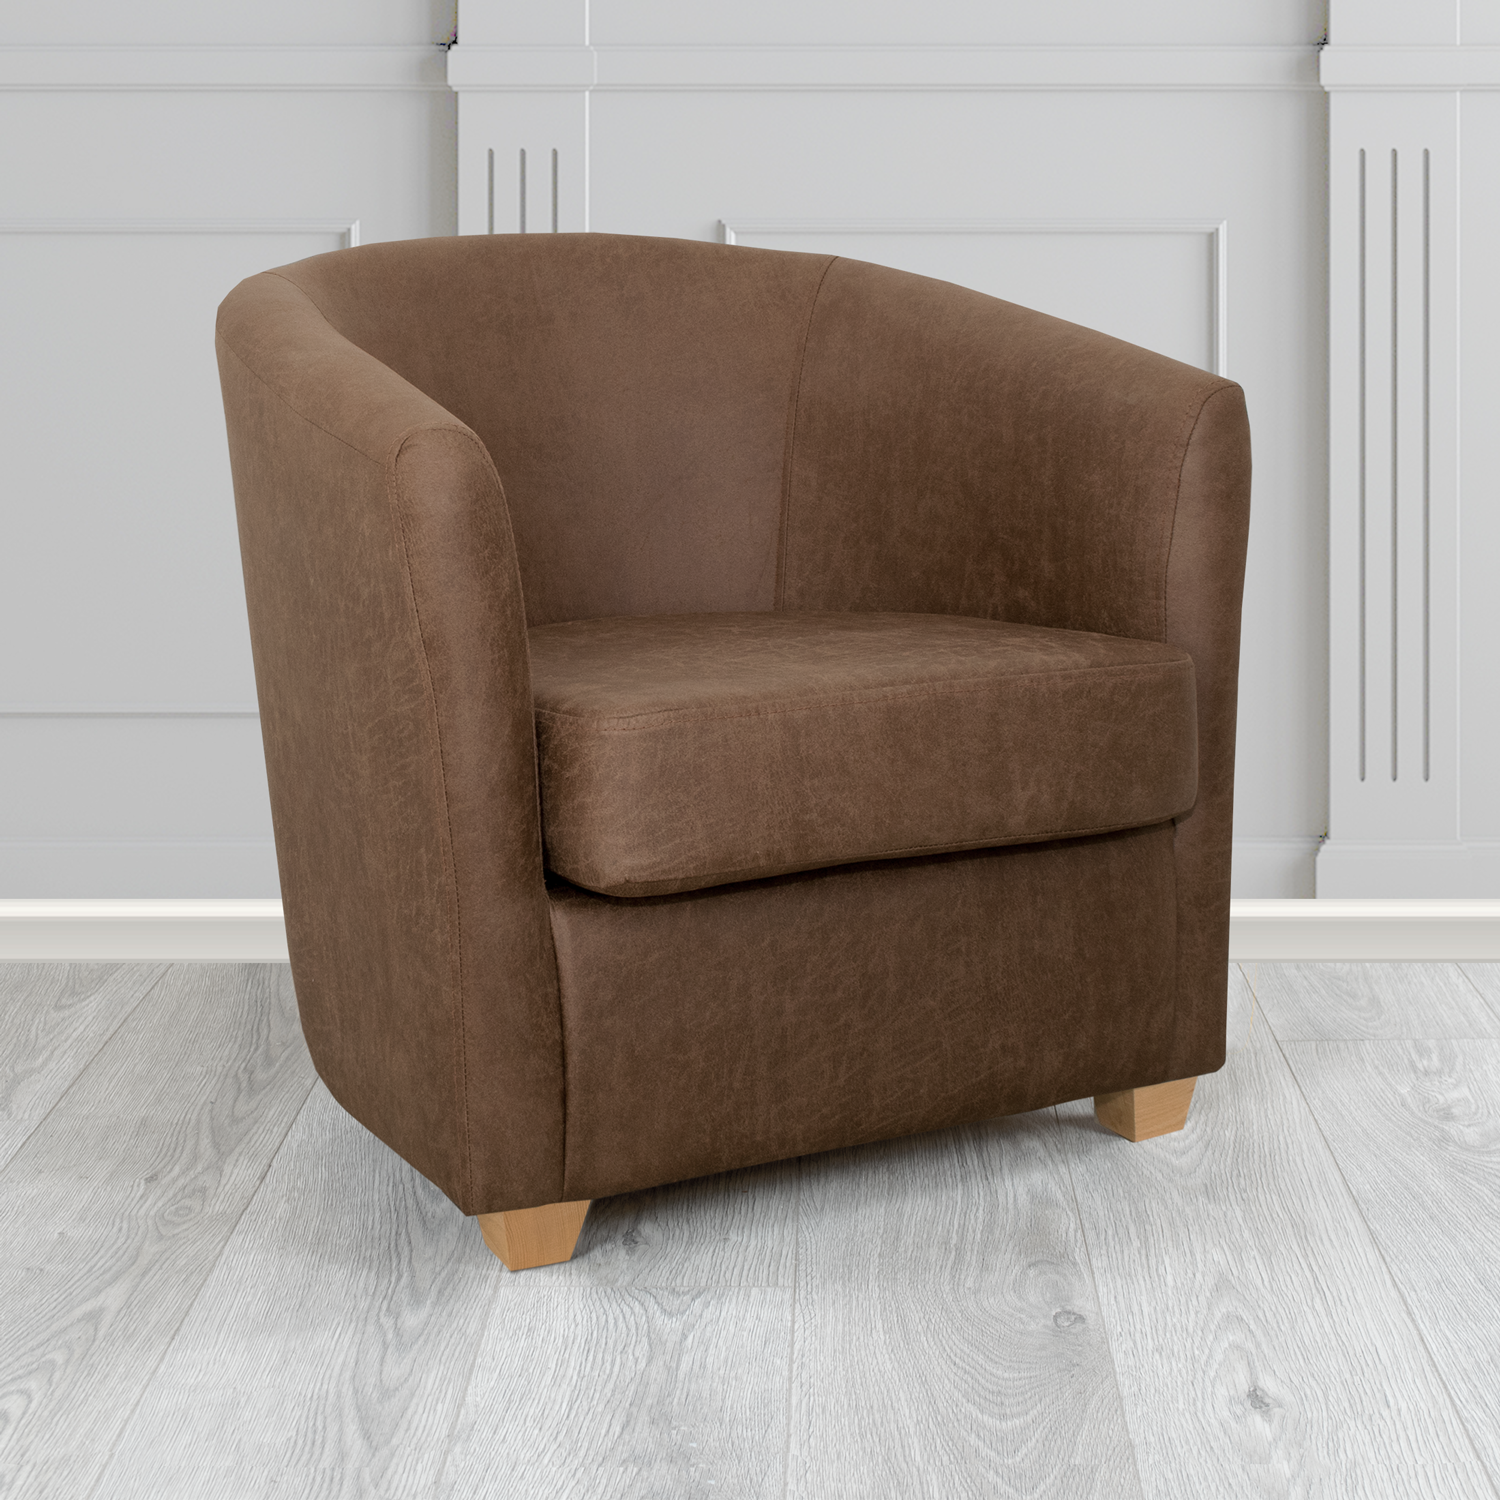 Cannes Tub Chair in Nevada Chocolate Faux Leather - The Tub Chair Shop